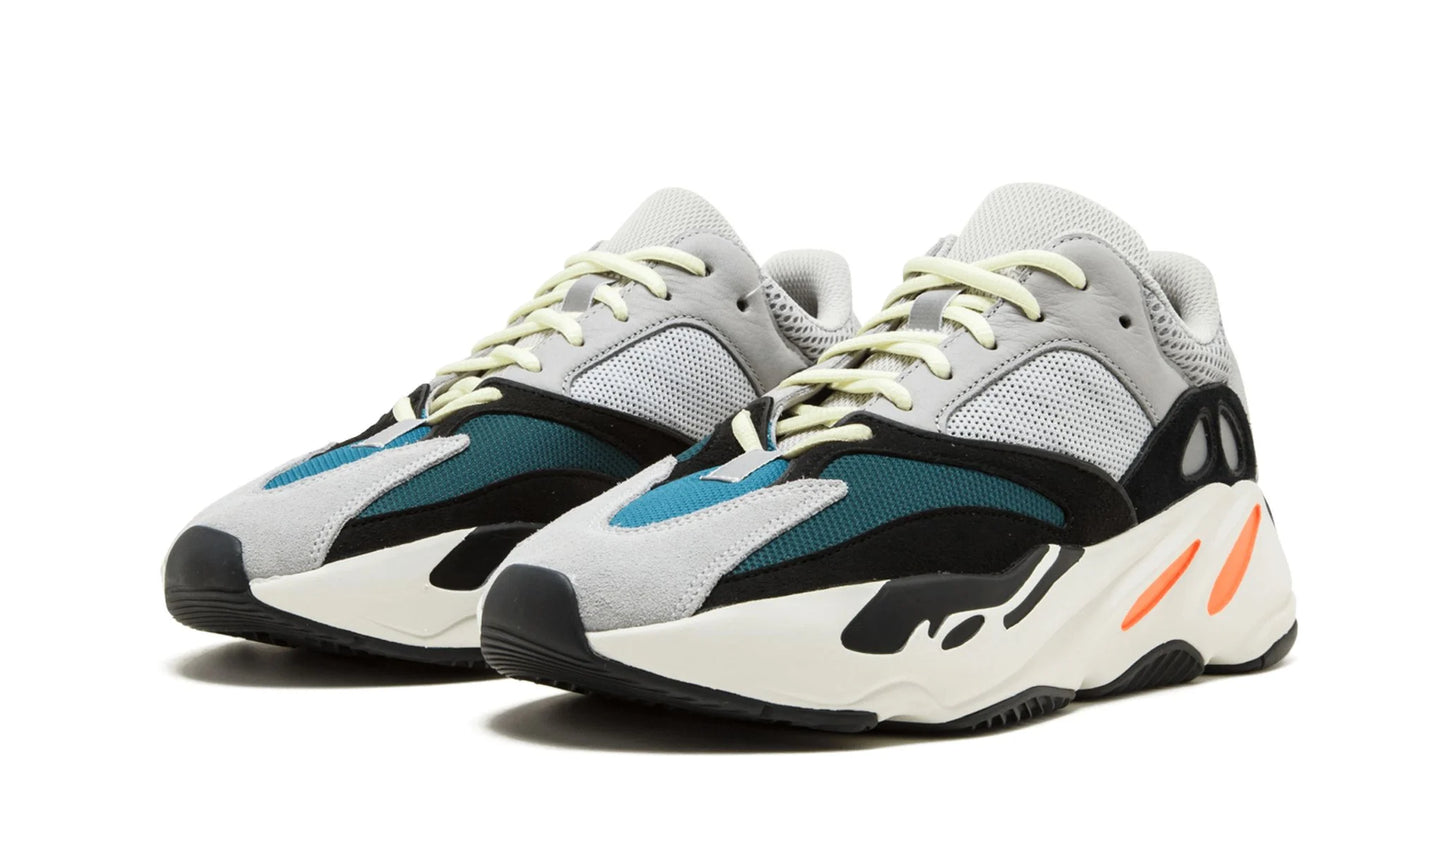 Adidas Yeezy 700 Wave Runner Front VIew